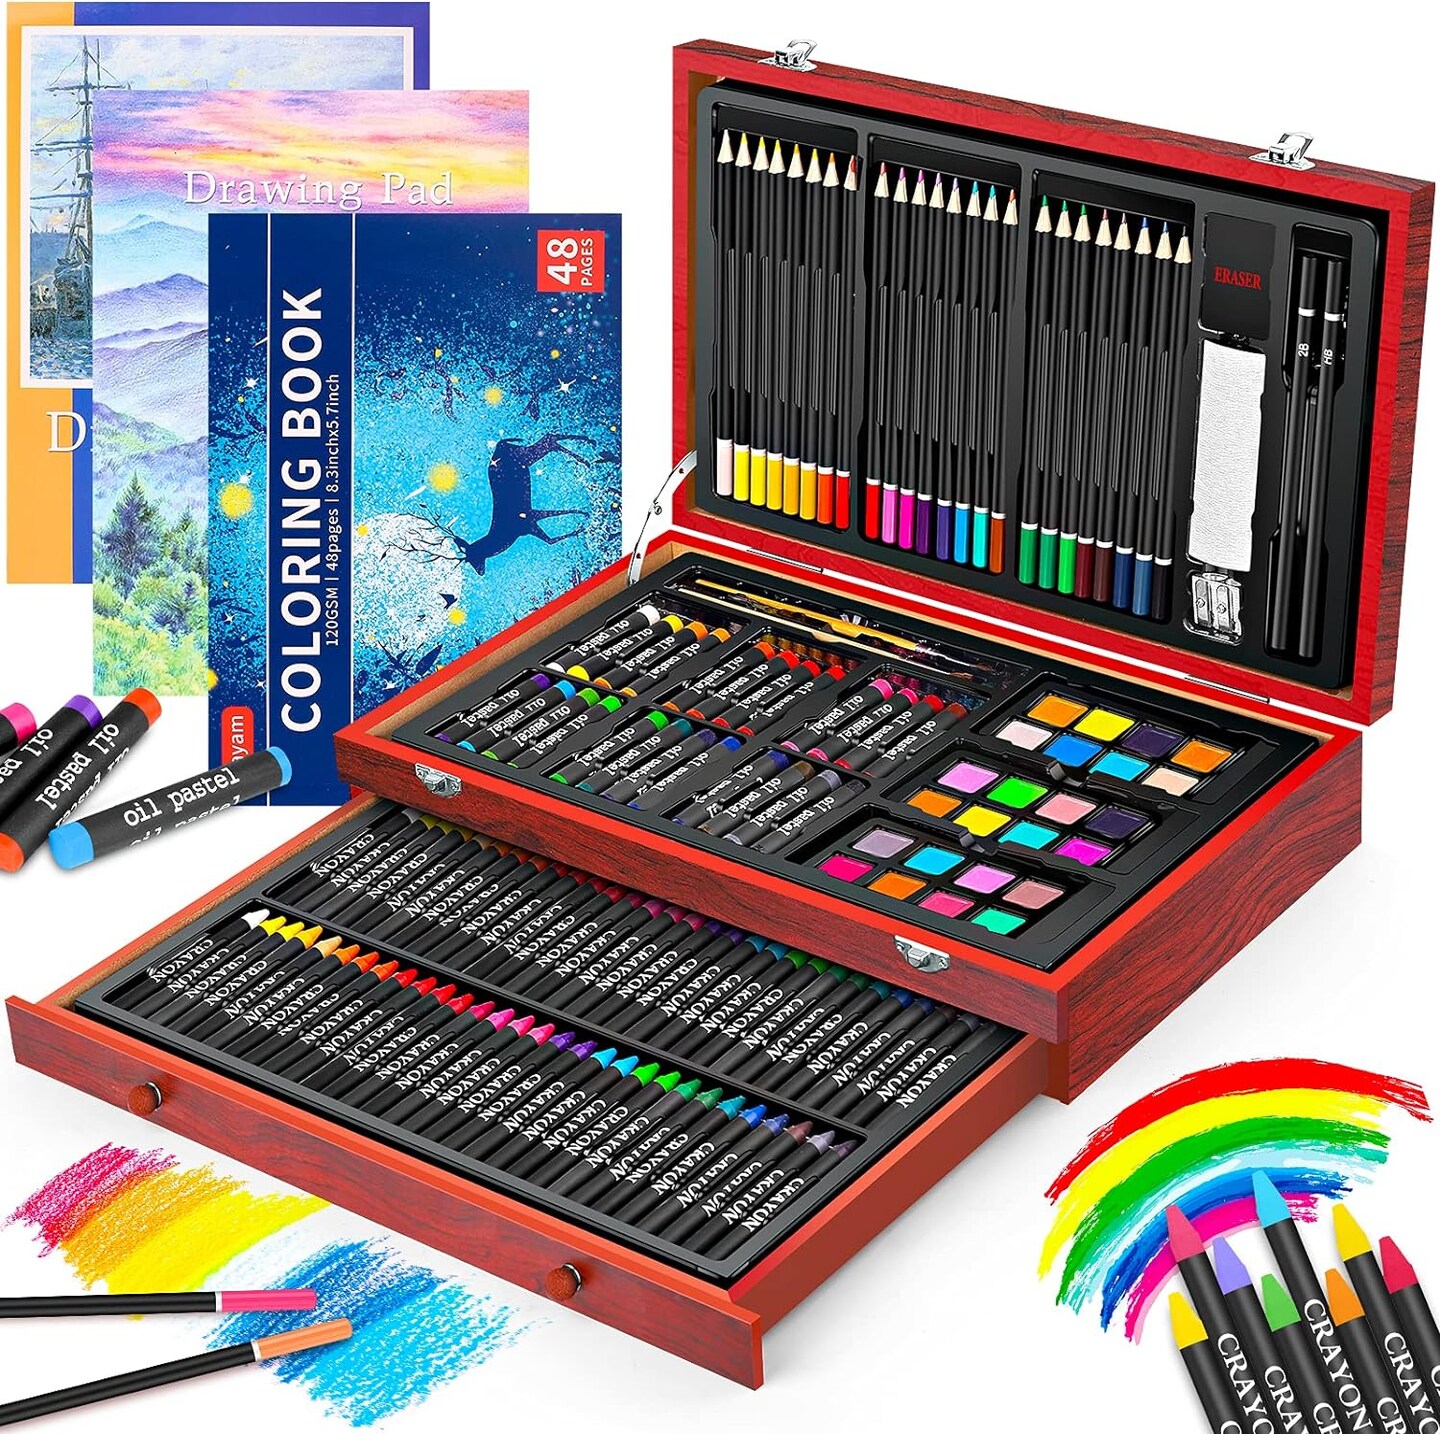 Art Supplies: 150-Pack Deluxe Wooden Art Set Crafts Drawing Painting Kit with 1 Coloring Book, 2 Sketch Pads, and Creative Gift Box for Adults Artists: Beginners, Kids, Girls, Boys